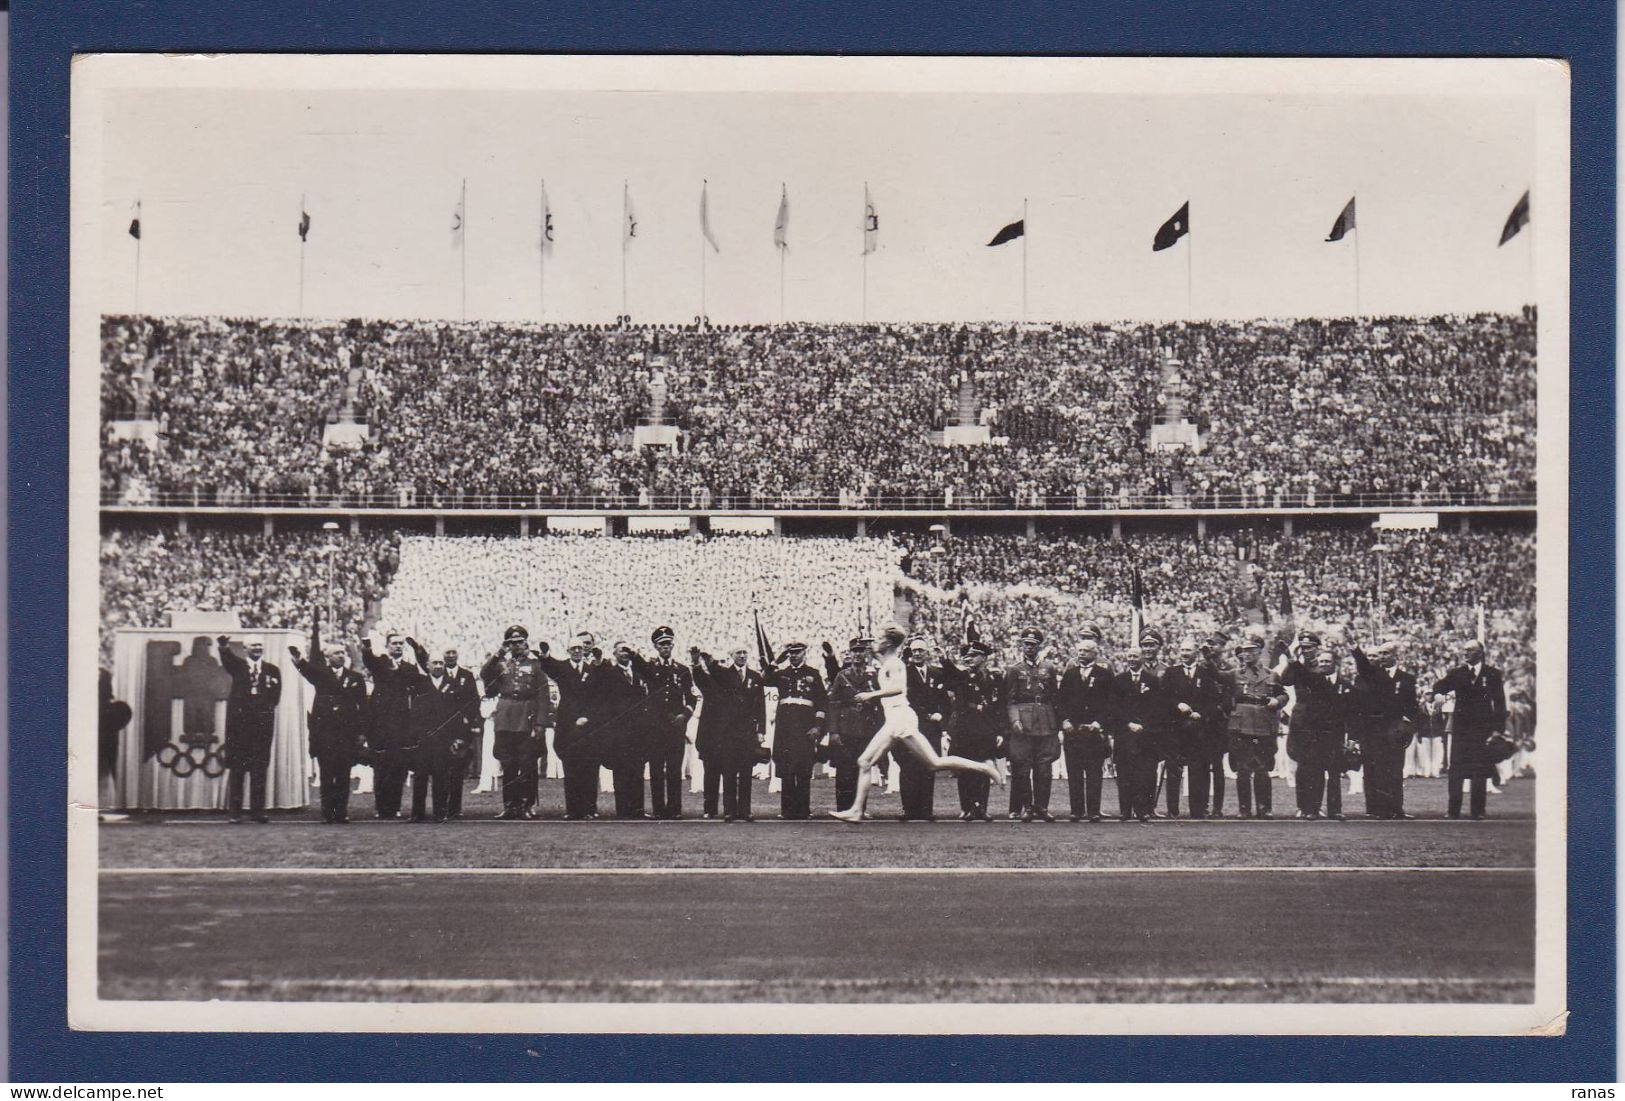 CPSM Jeux Olympiques JO Berlin 1936 Circulée - Giochi Olimpici